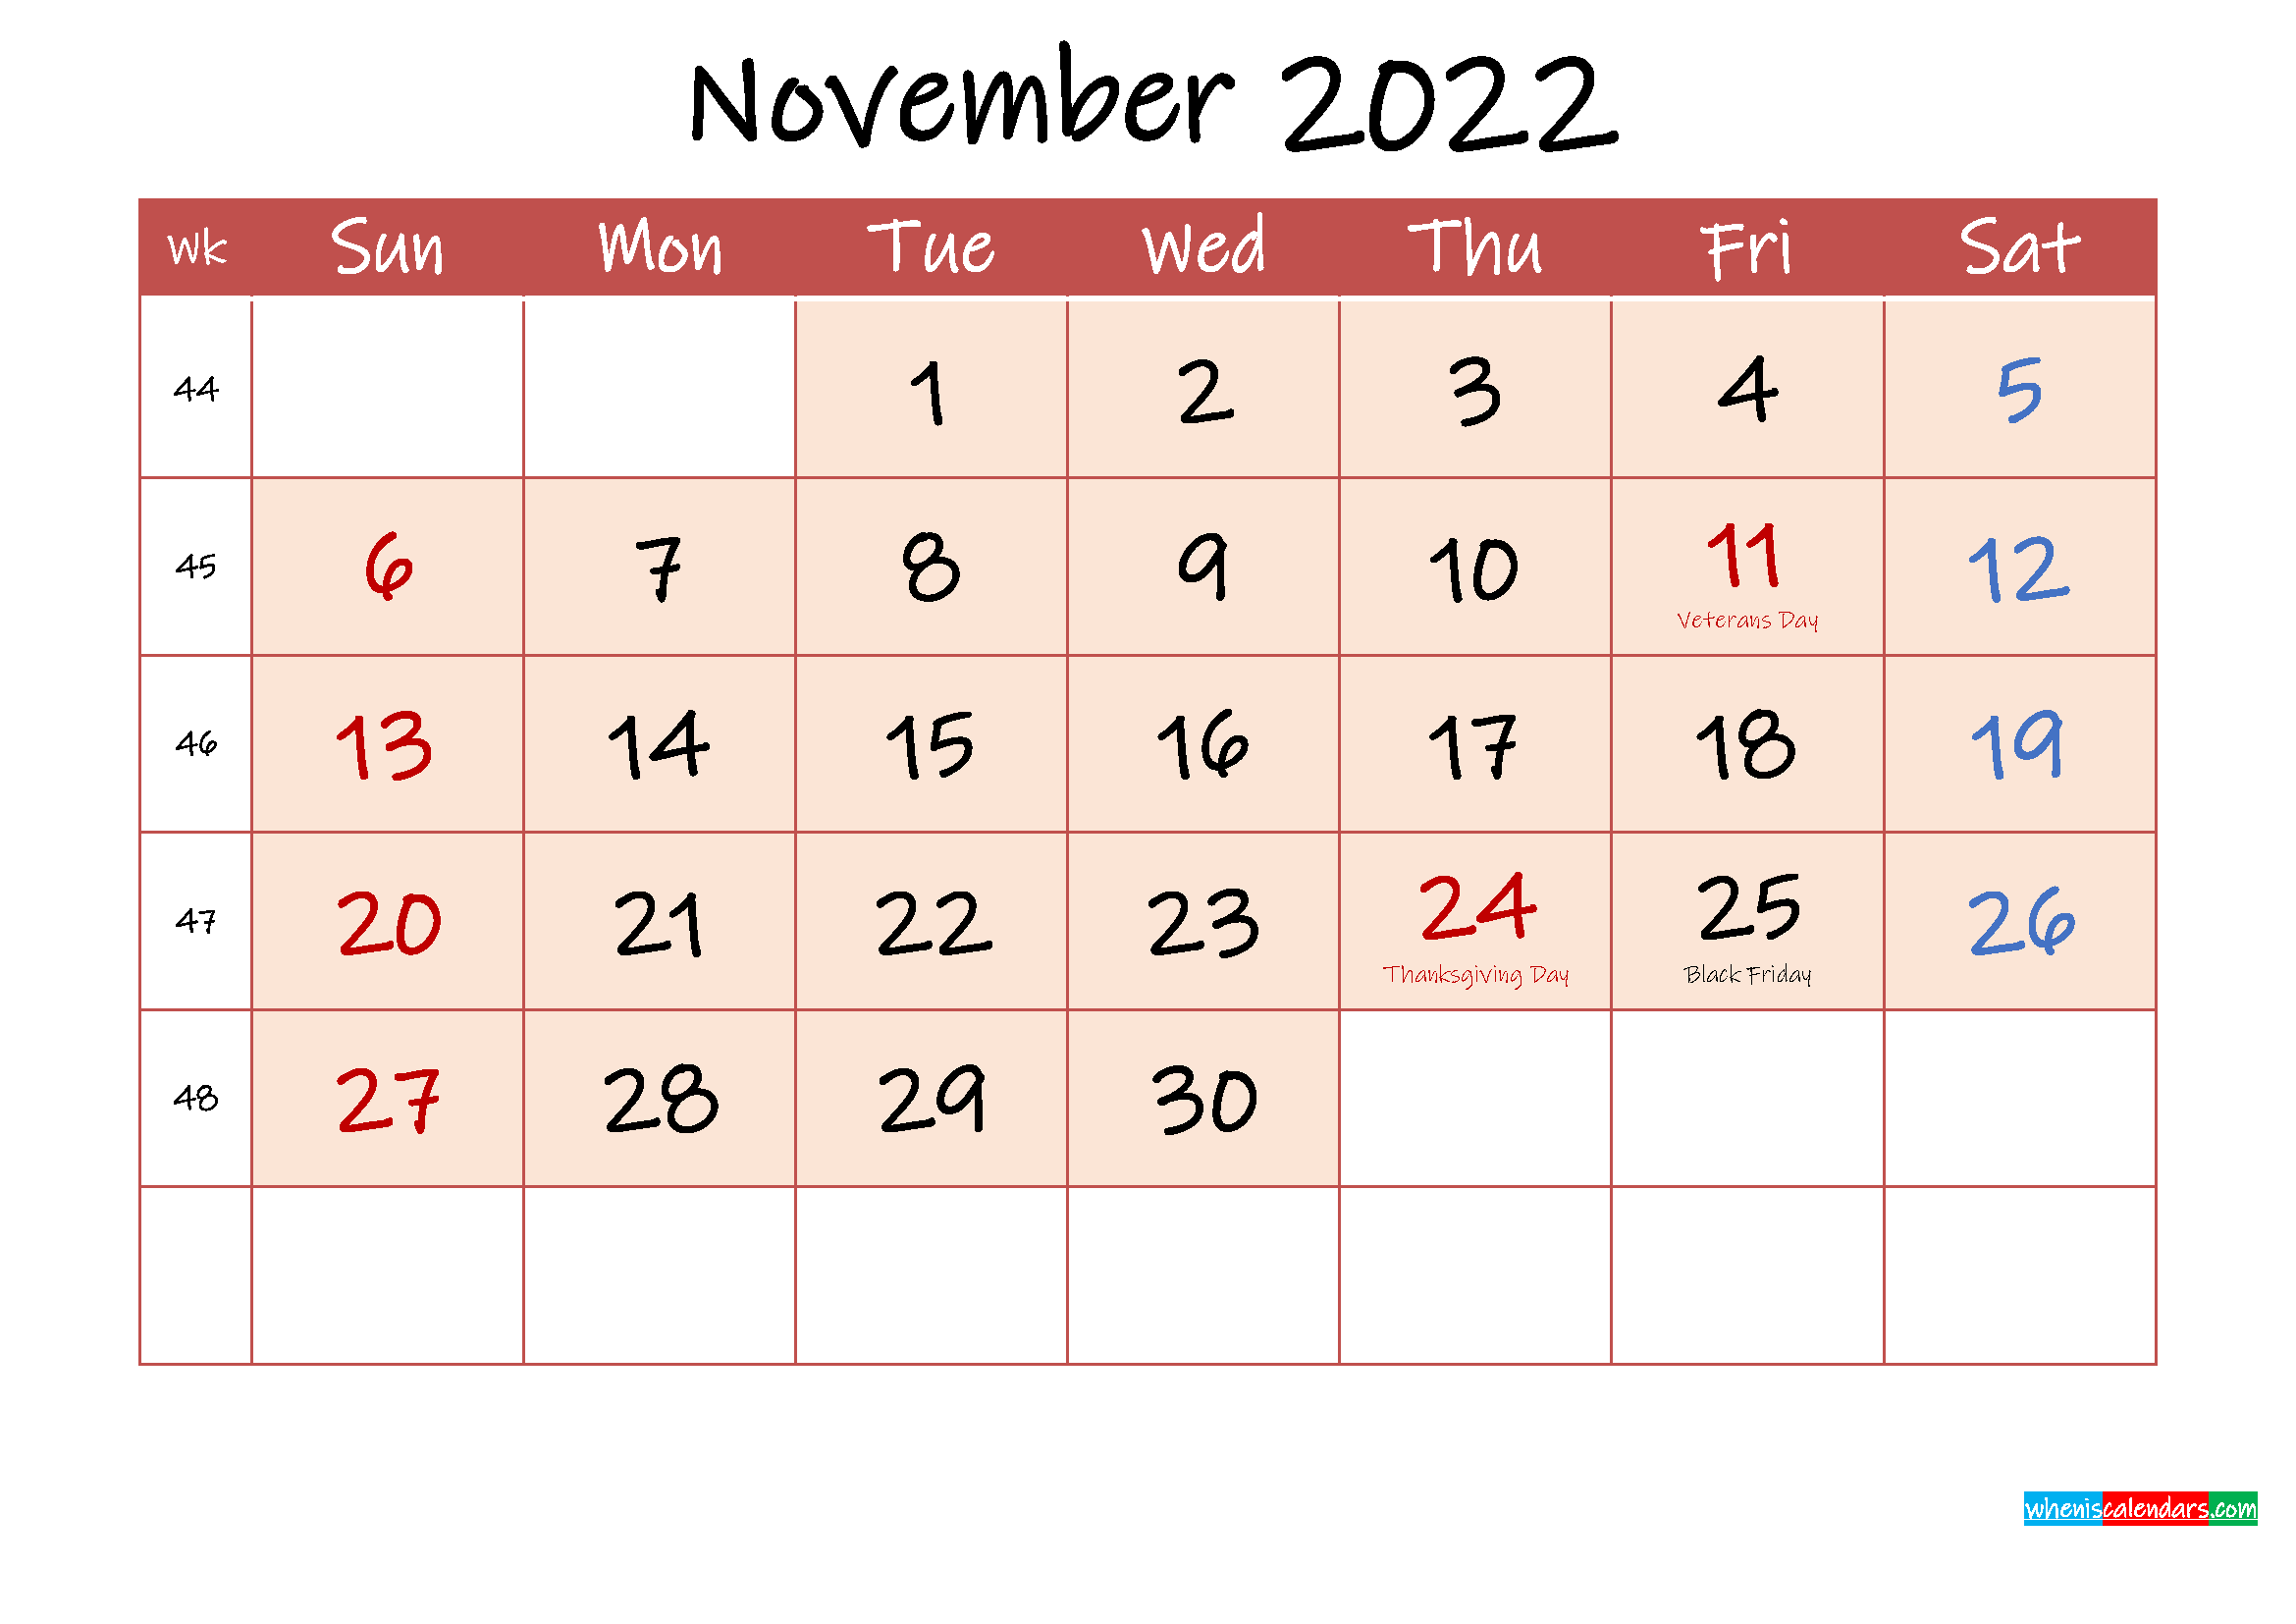 November 2022 Free Printable Calendar With Holidays - Template Ink22m119